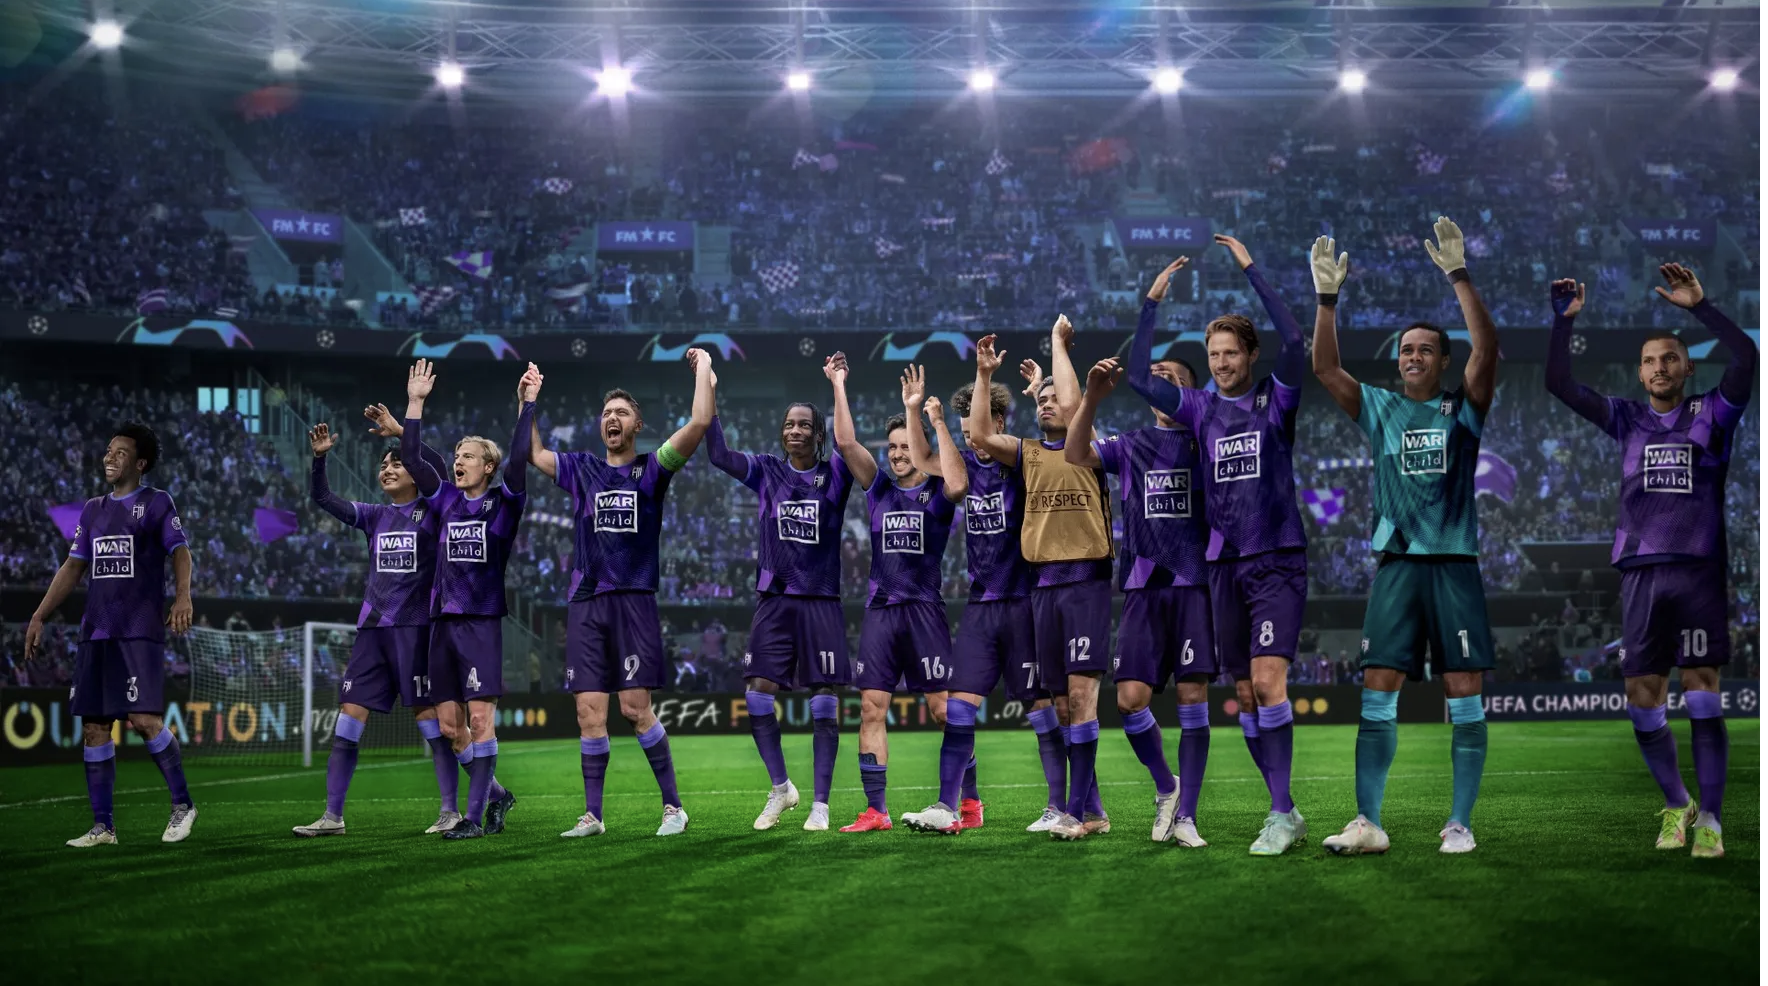 Football Manager 2024 review – the best FM to date